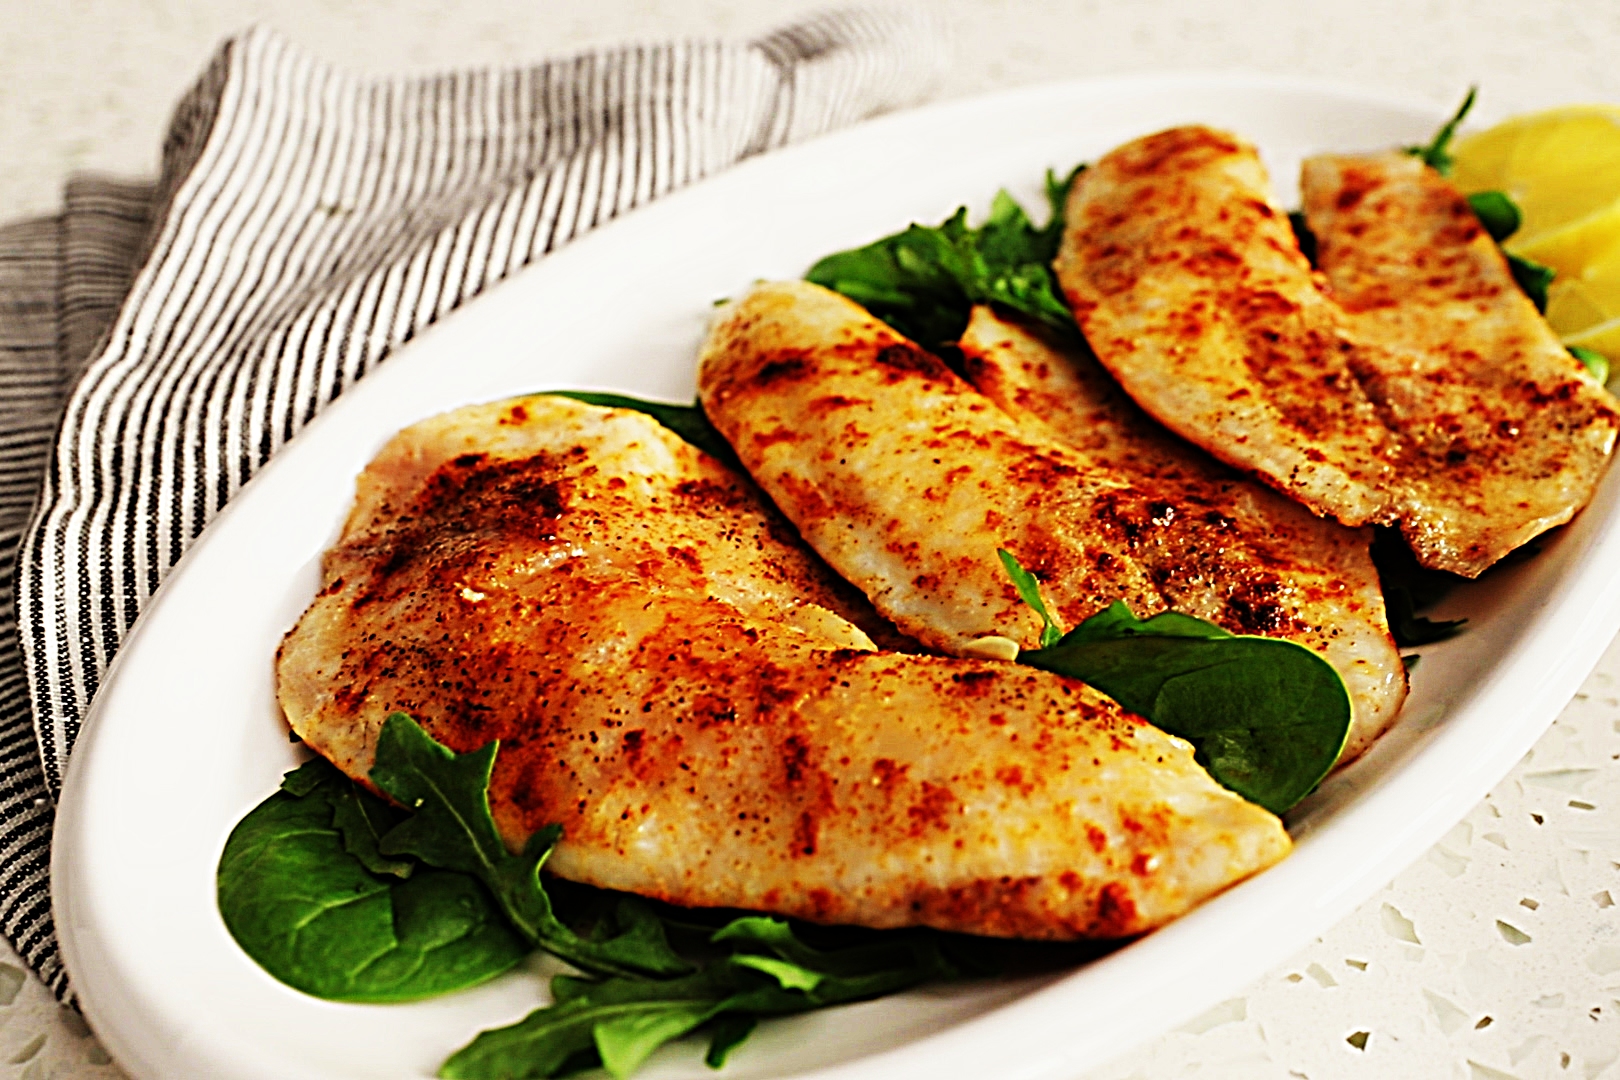 Stupid-Easy Recipe for Reduced-Fat Baked Tilapia (#1 Top-Rated)